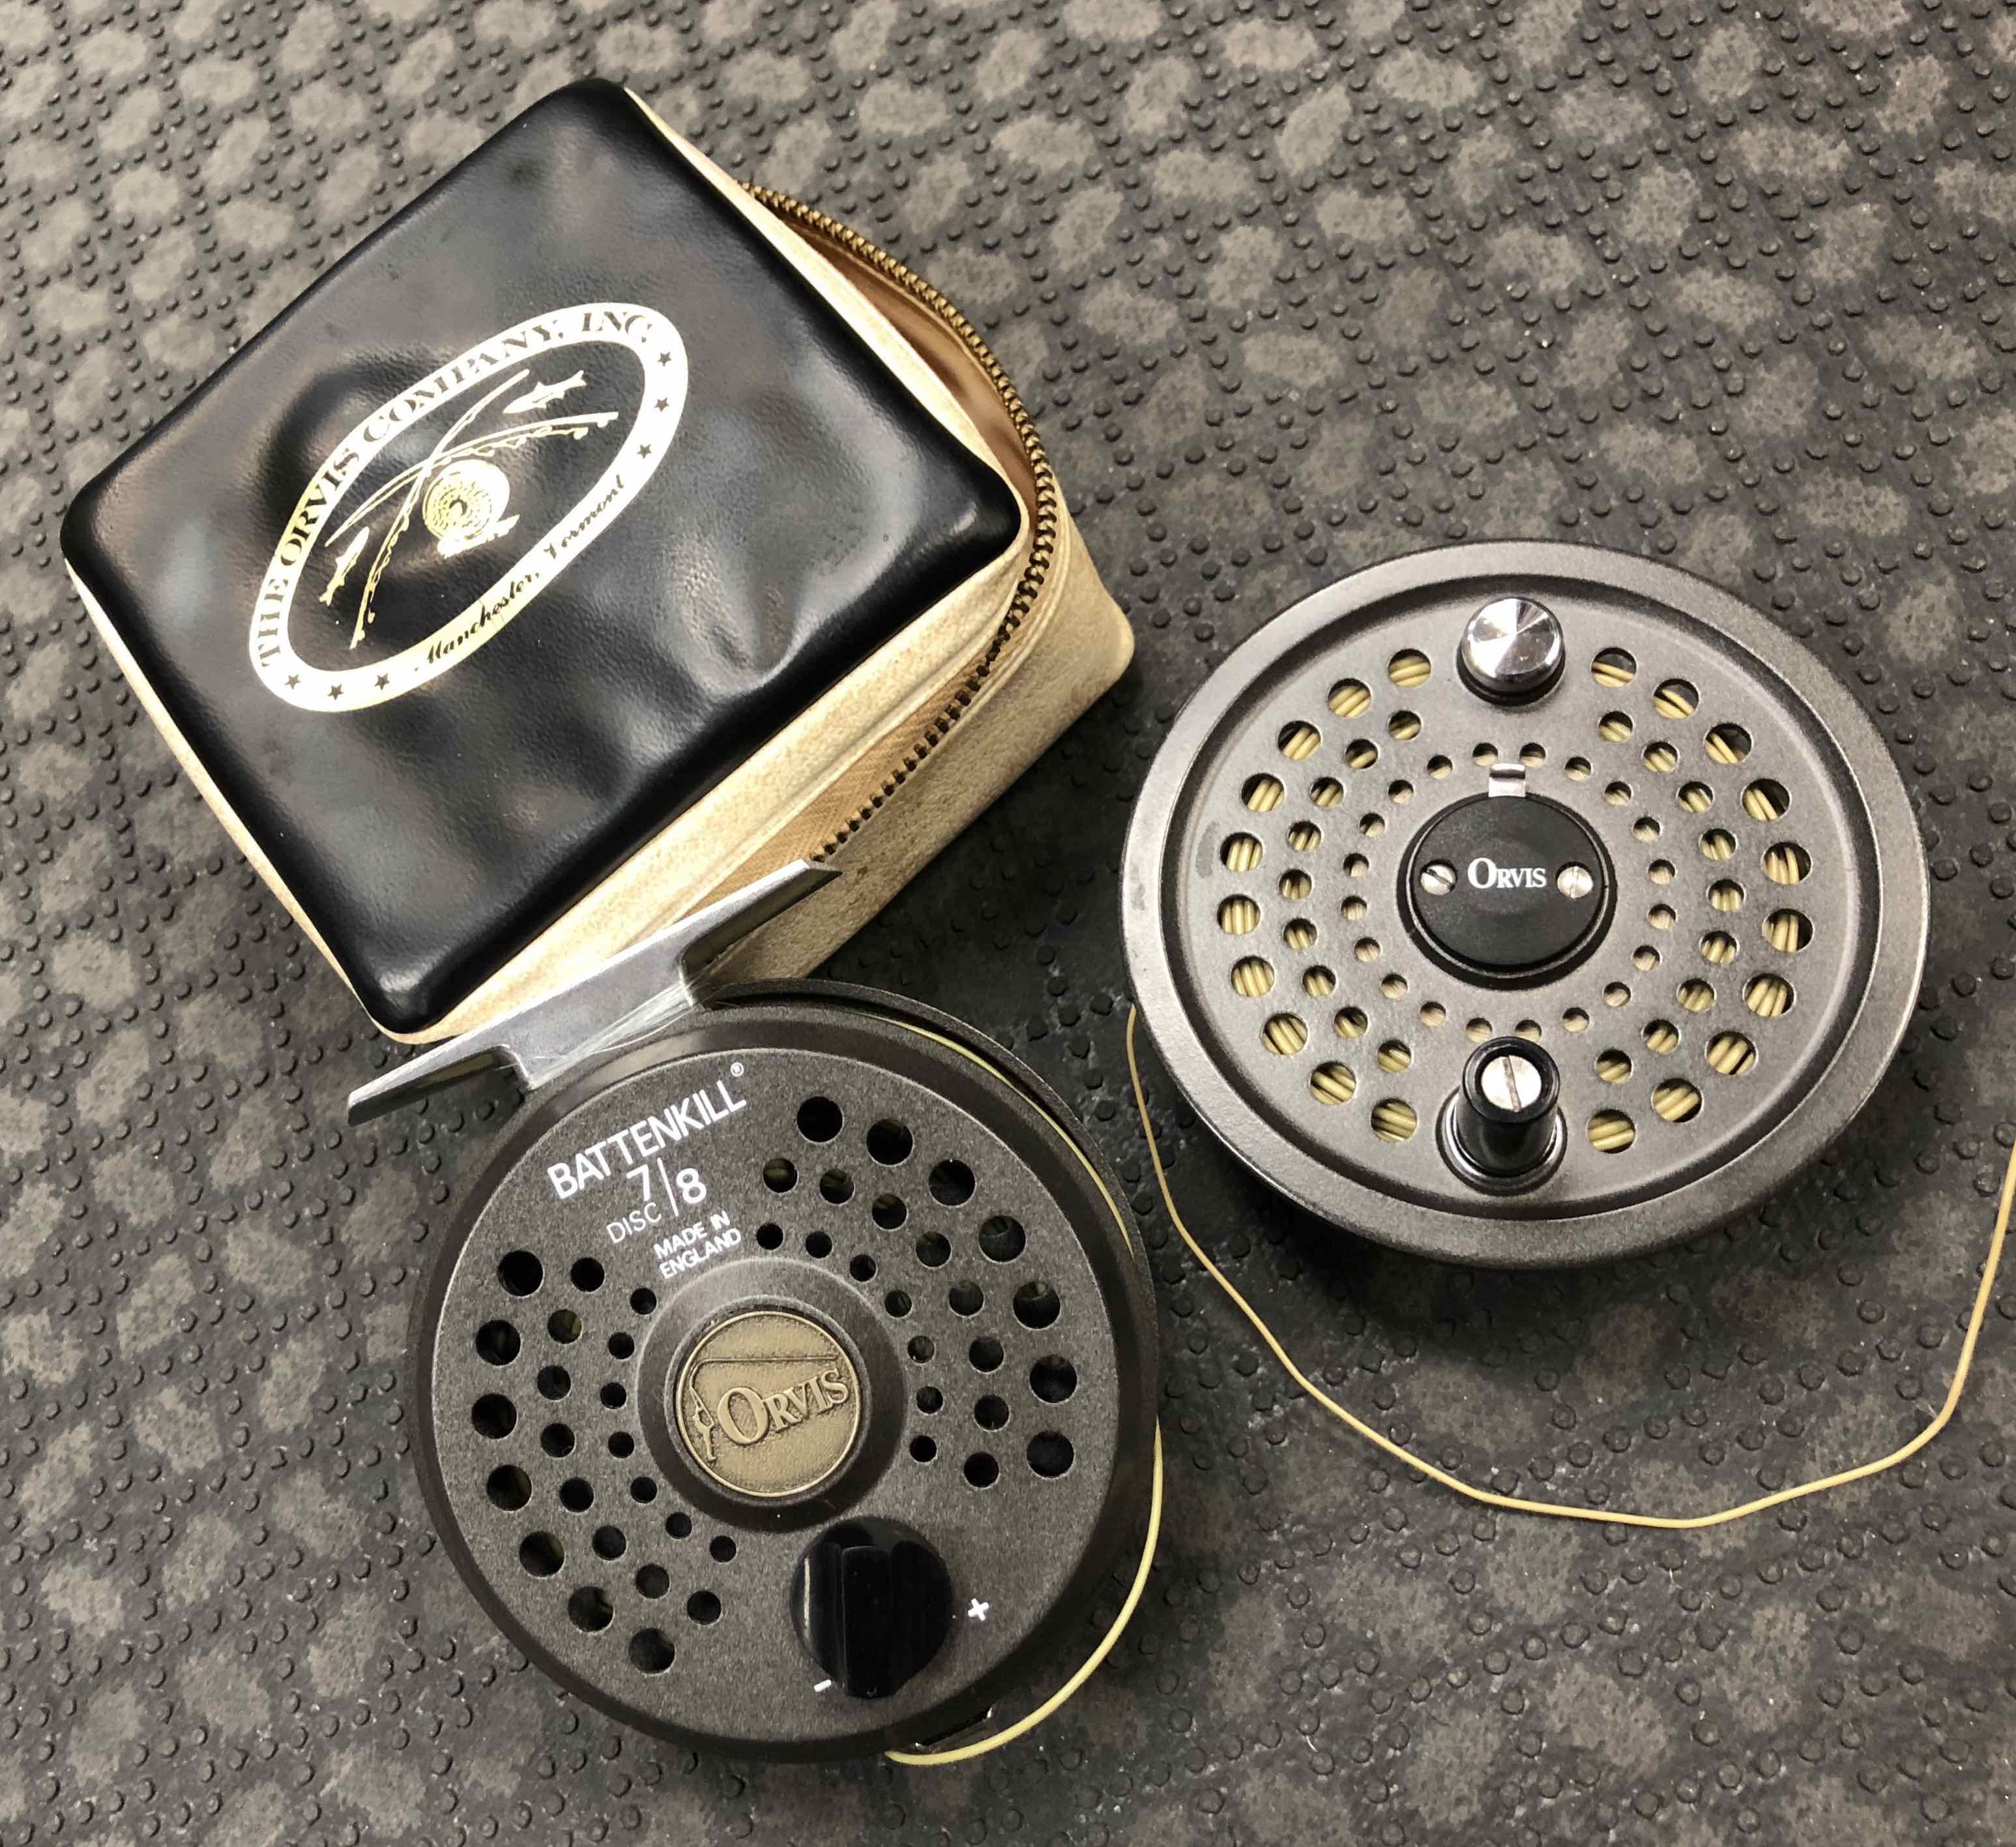 Orvis Battenkill 7/8 Fly Reel, Spare Spool & Zippered Pouch c/w Two Fly Lines - GREAT SHAPE! - $175